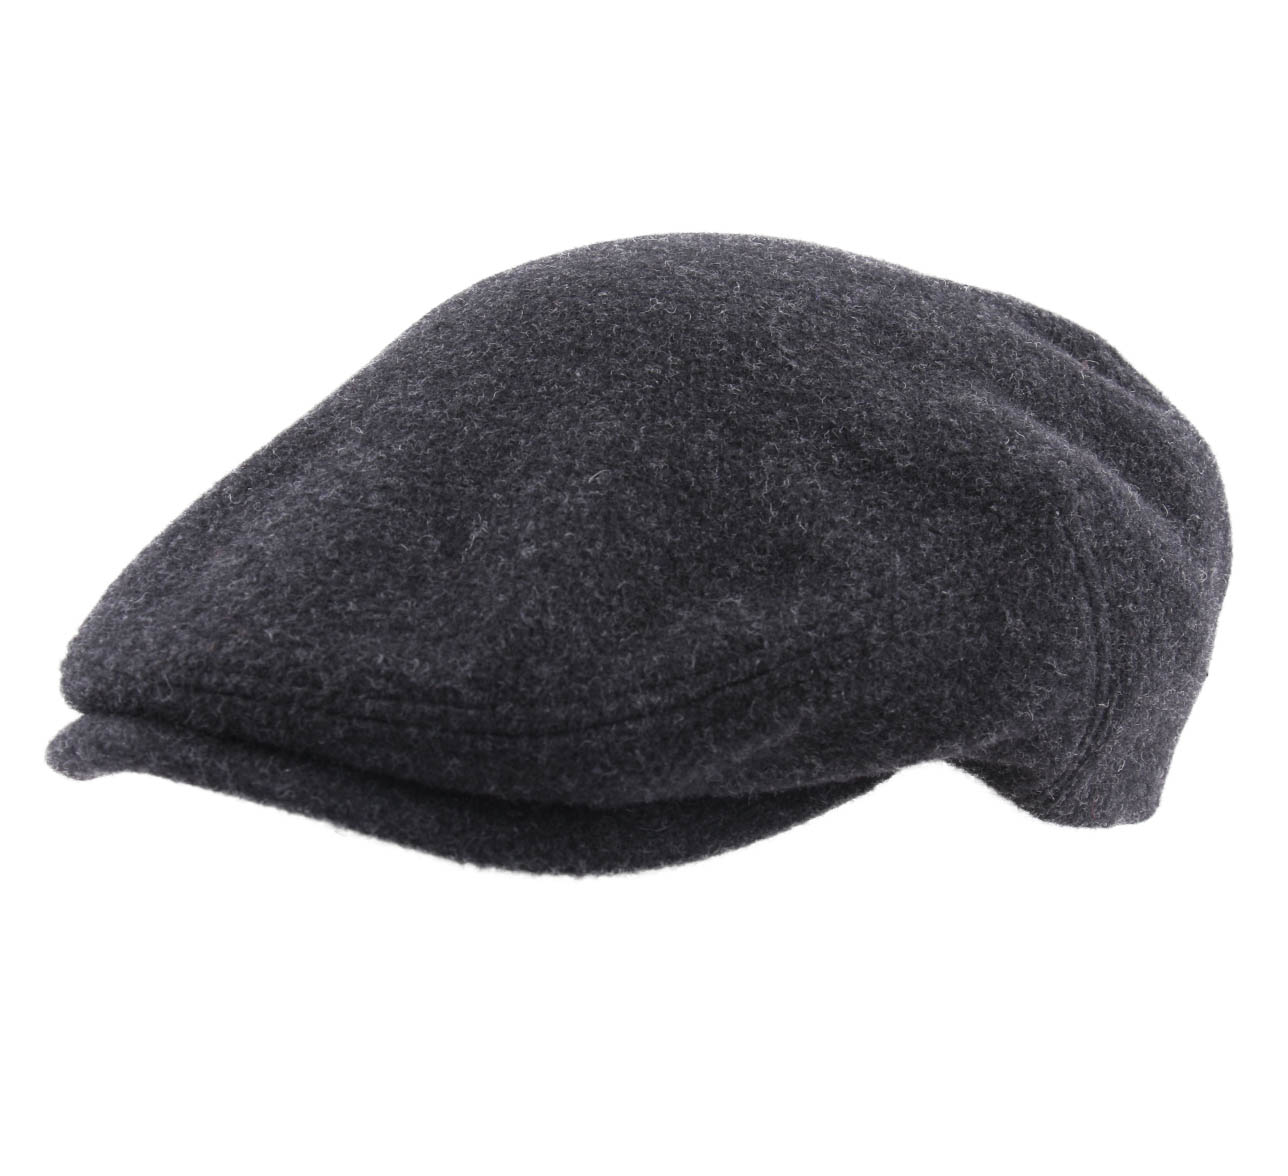 Made in The EU Ivy hat with Peak Ear Flaps Stetson Kent Wool Earflaps Flat Cap Men Lining Lining Autumn-Winter 